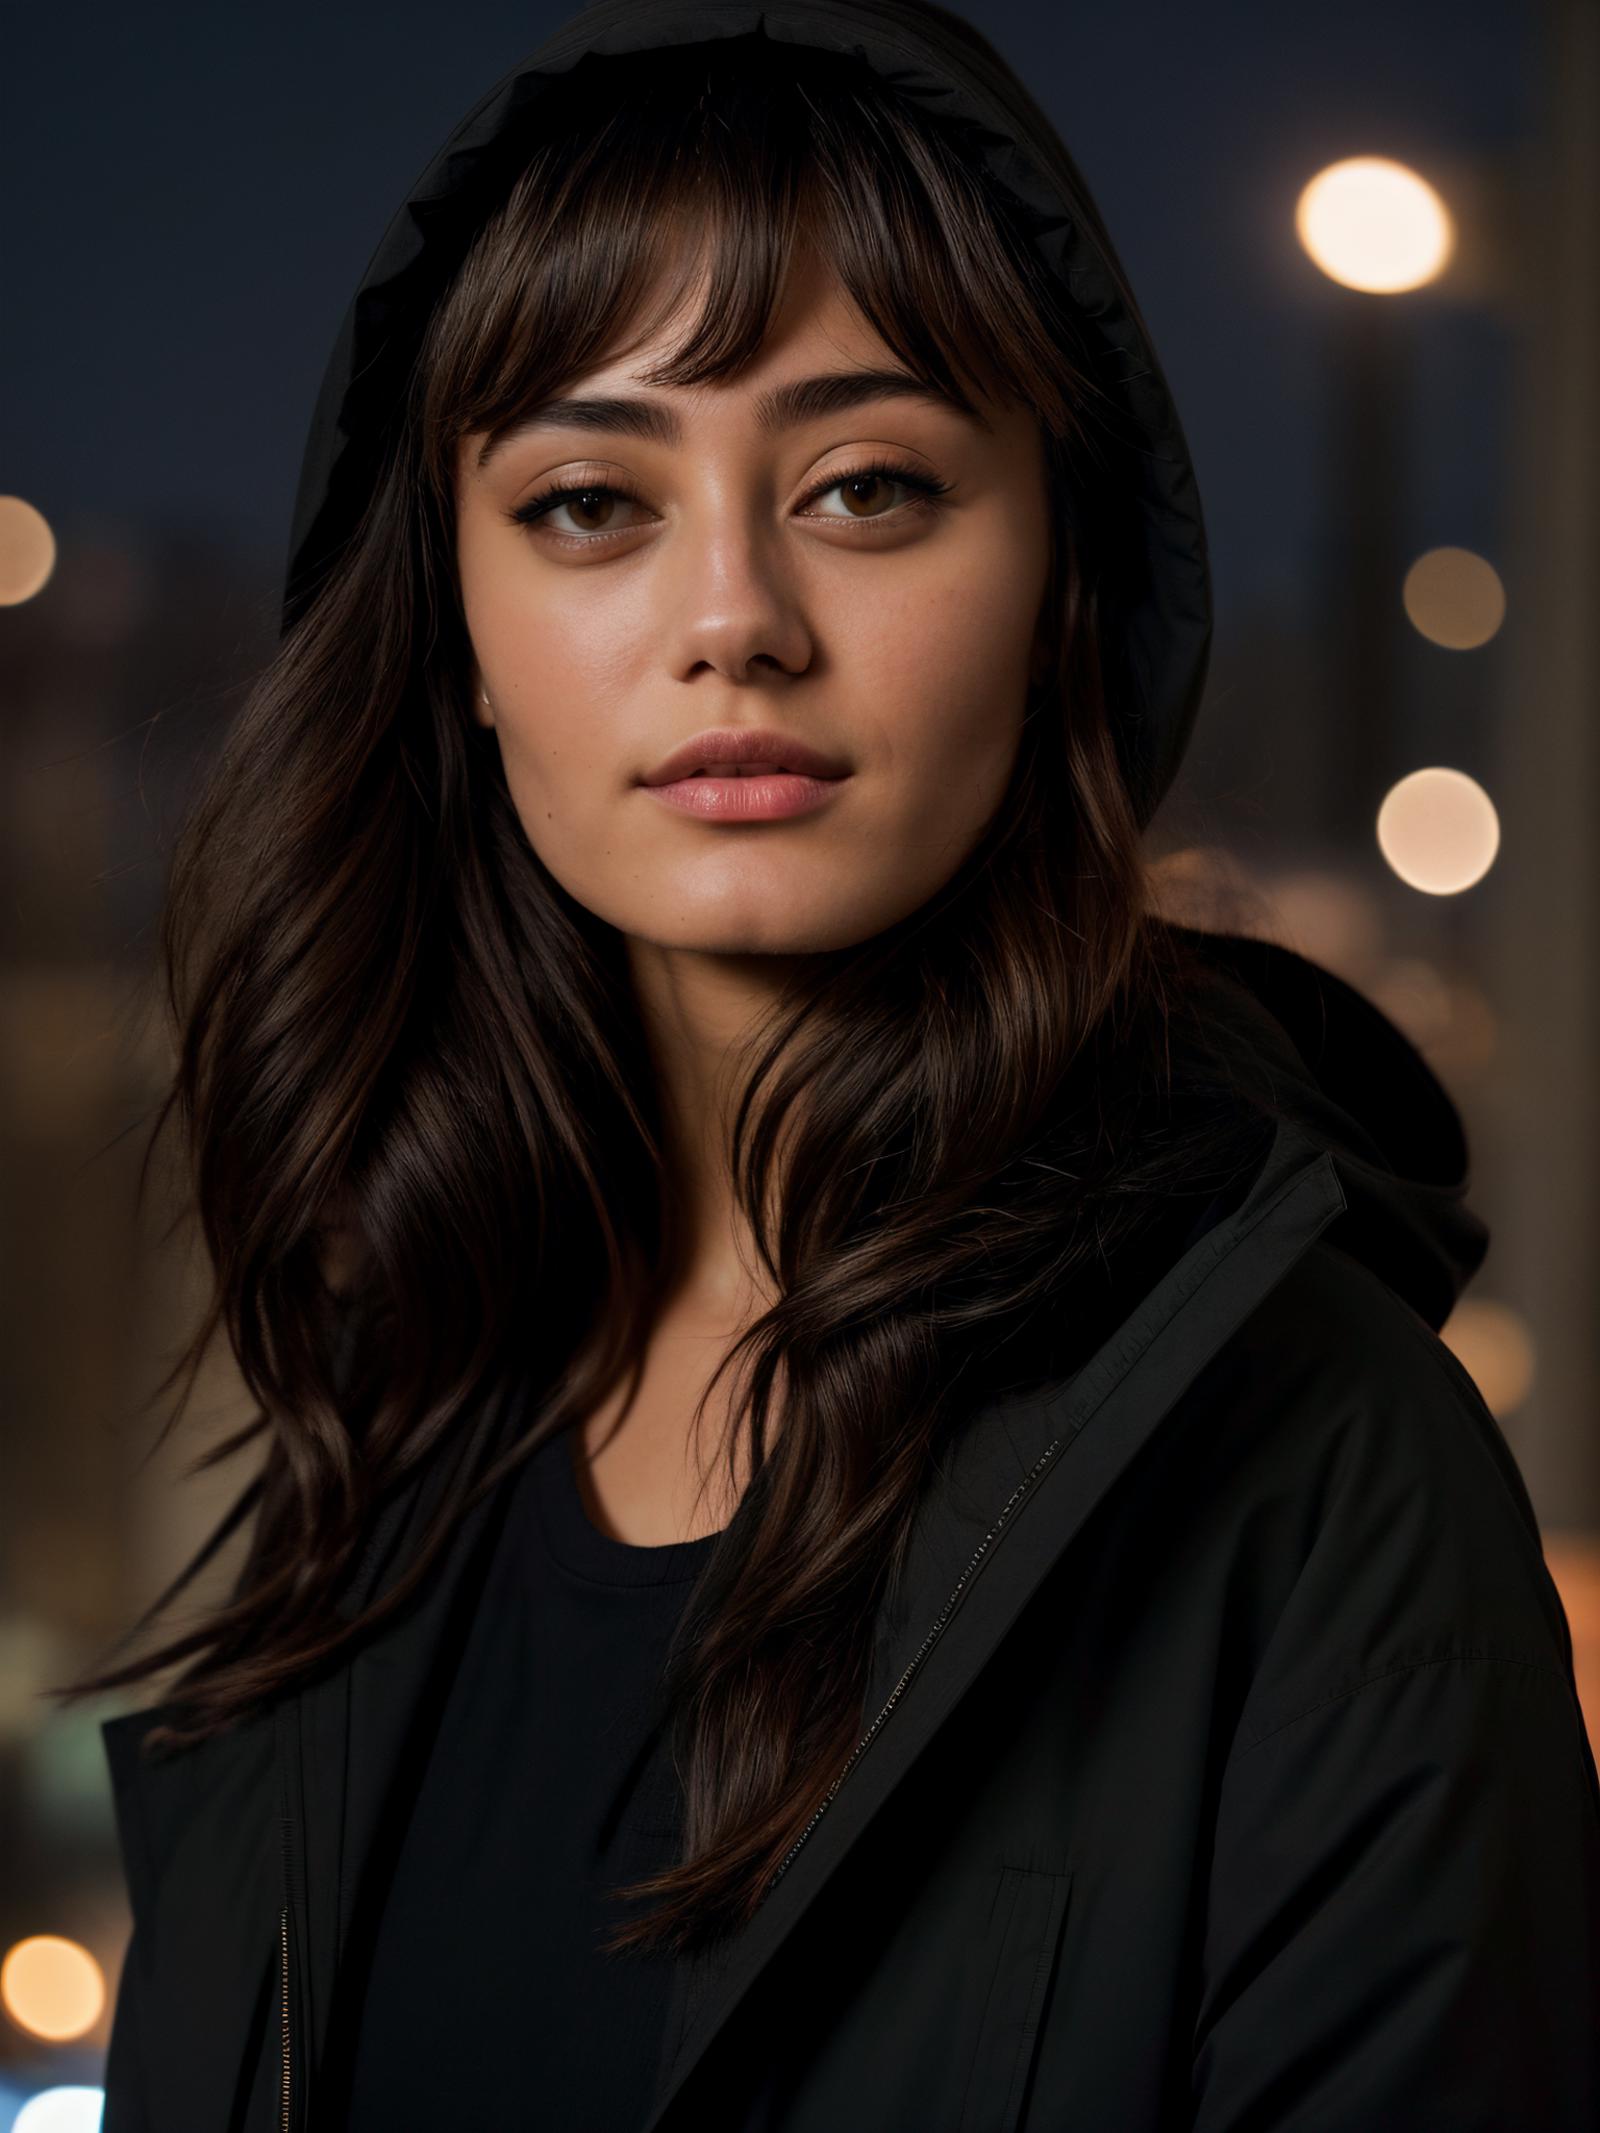 Ella Purnell image by damocles_aaa